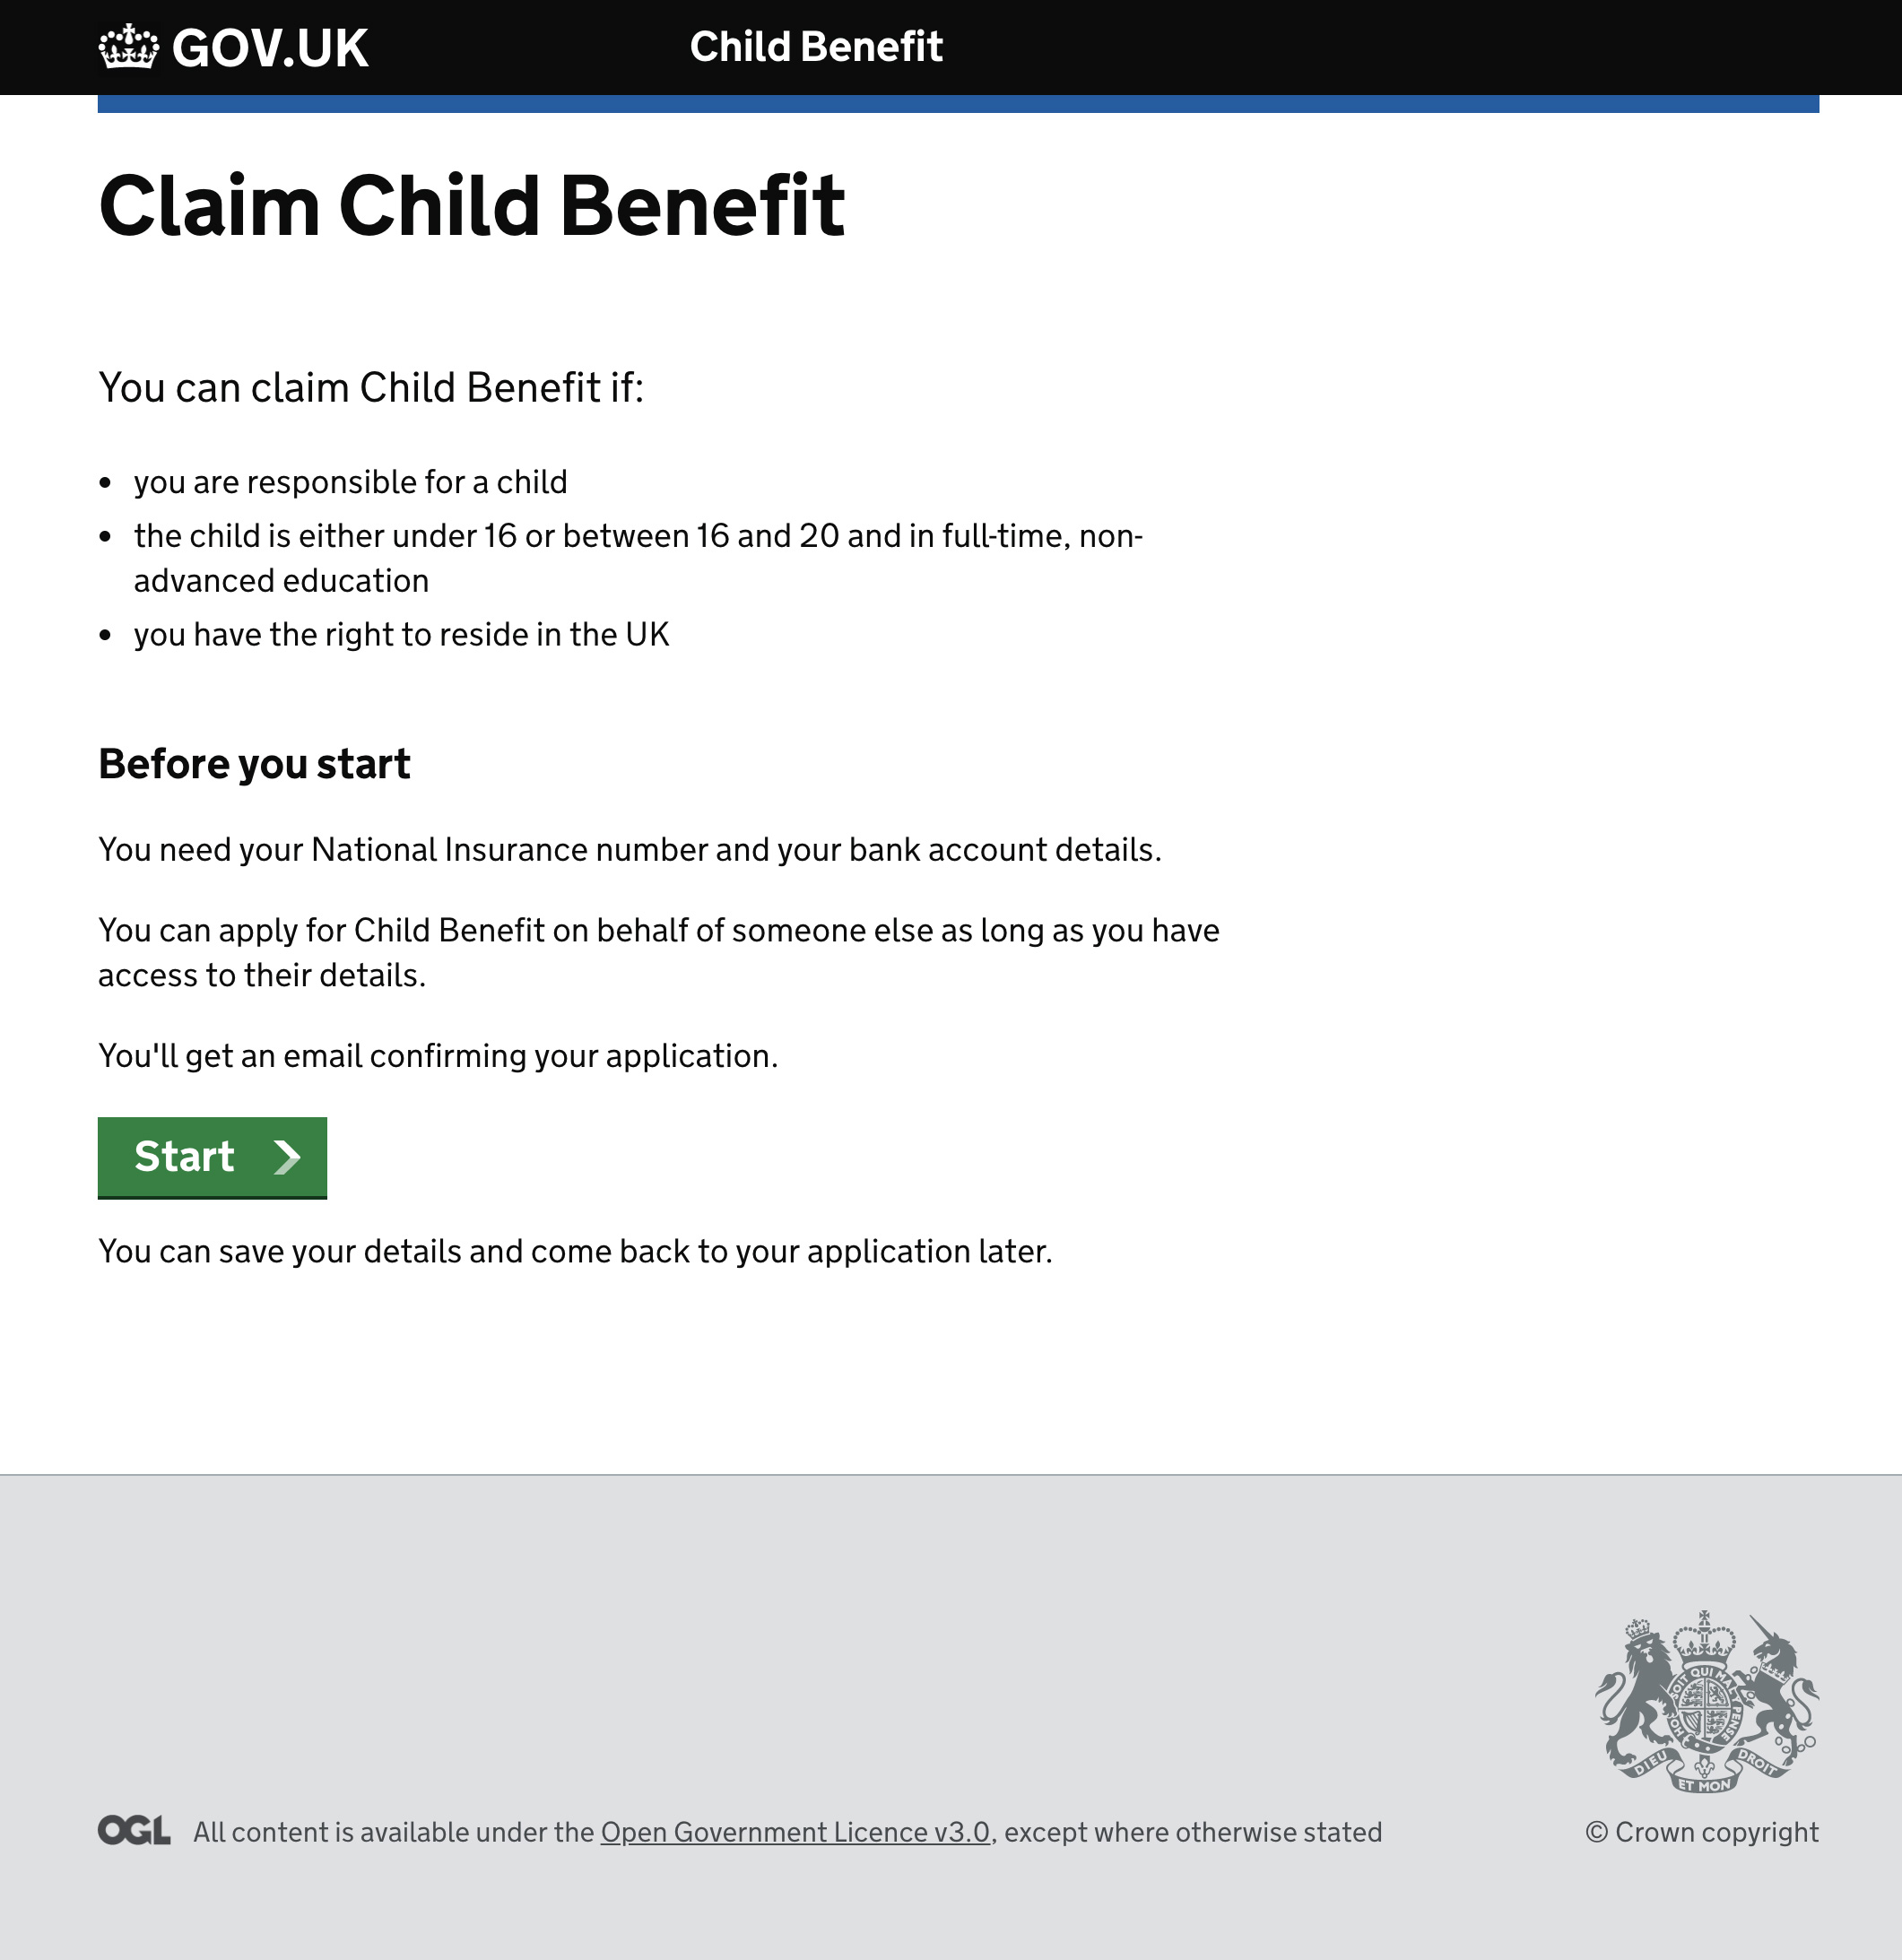 A screenshot of the proposed Child Benefit start page